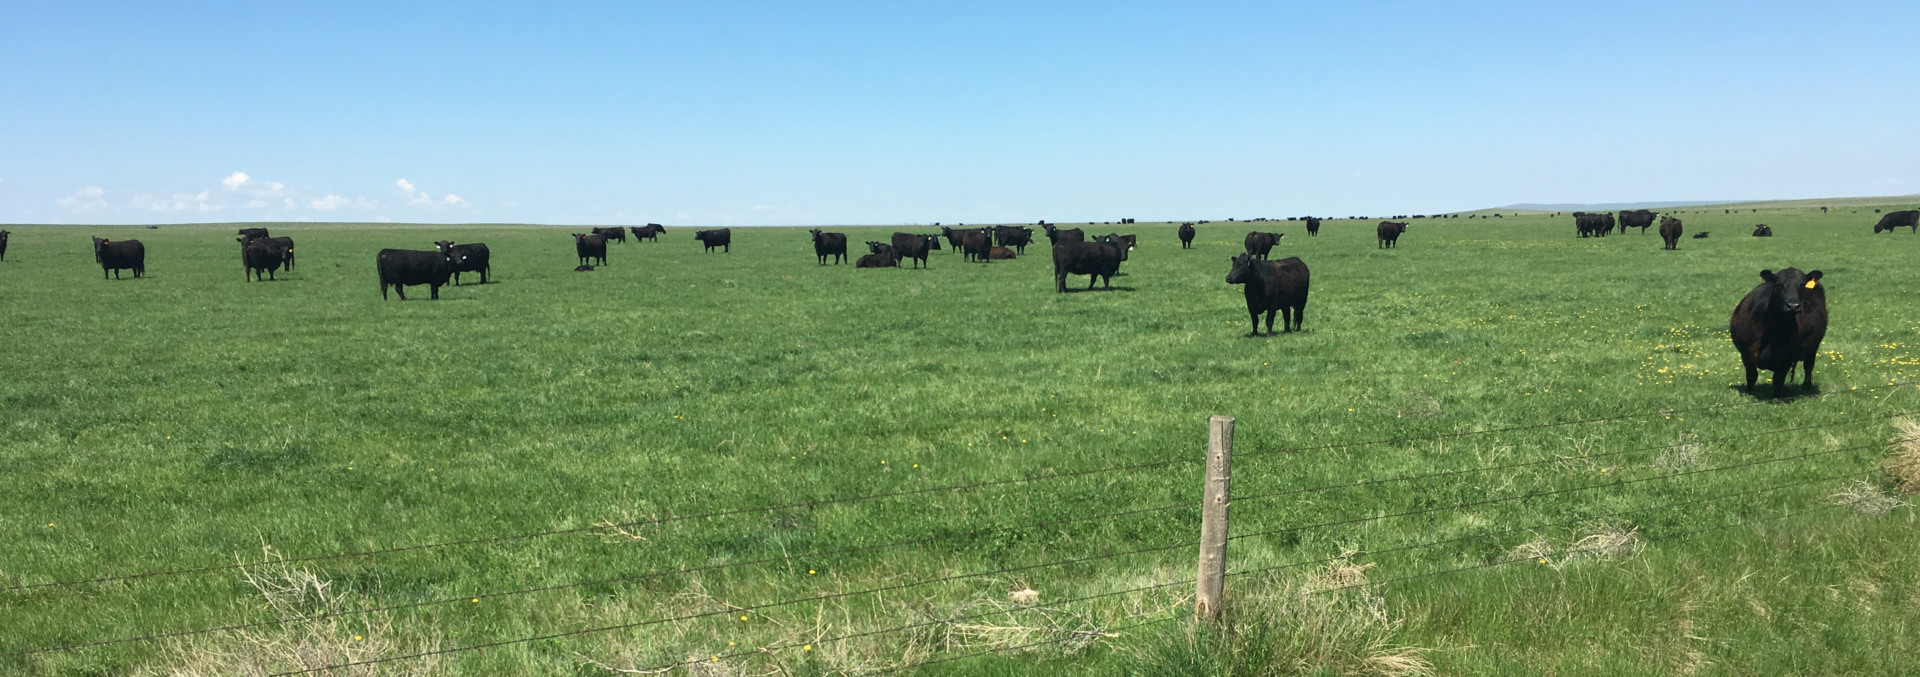 south dakota property for sale northern plains grassland and cattle ranch